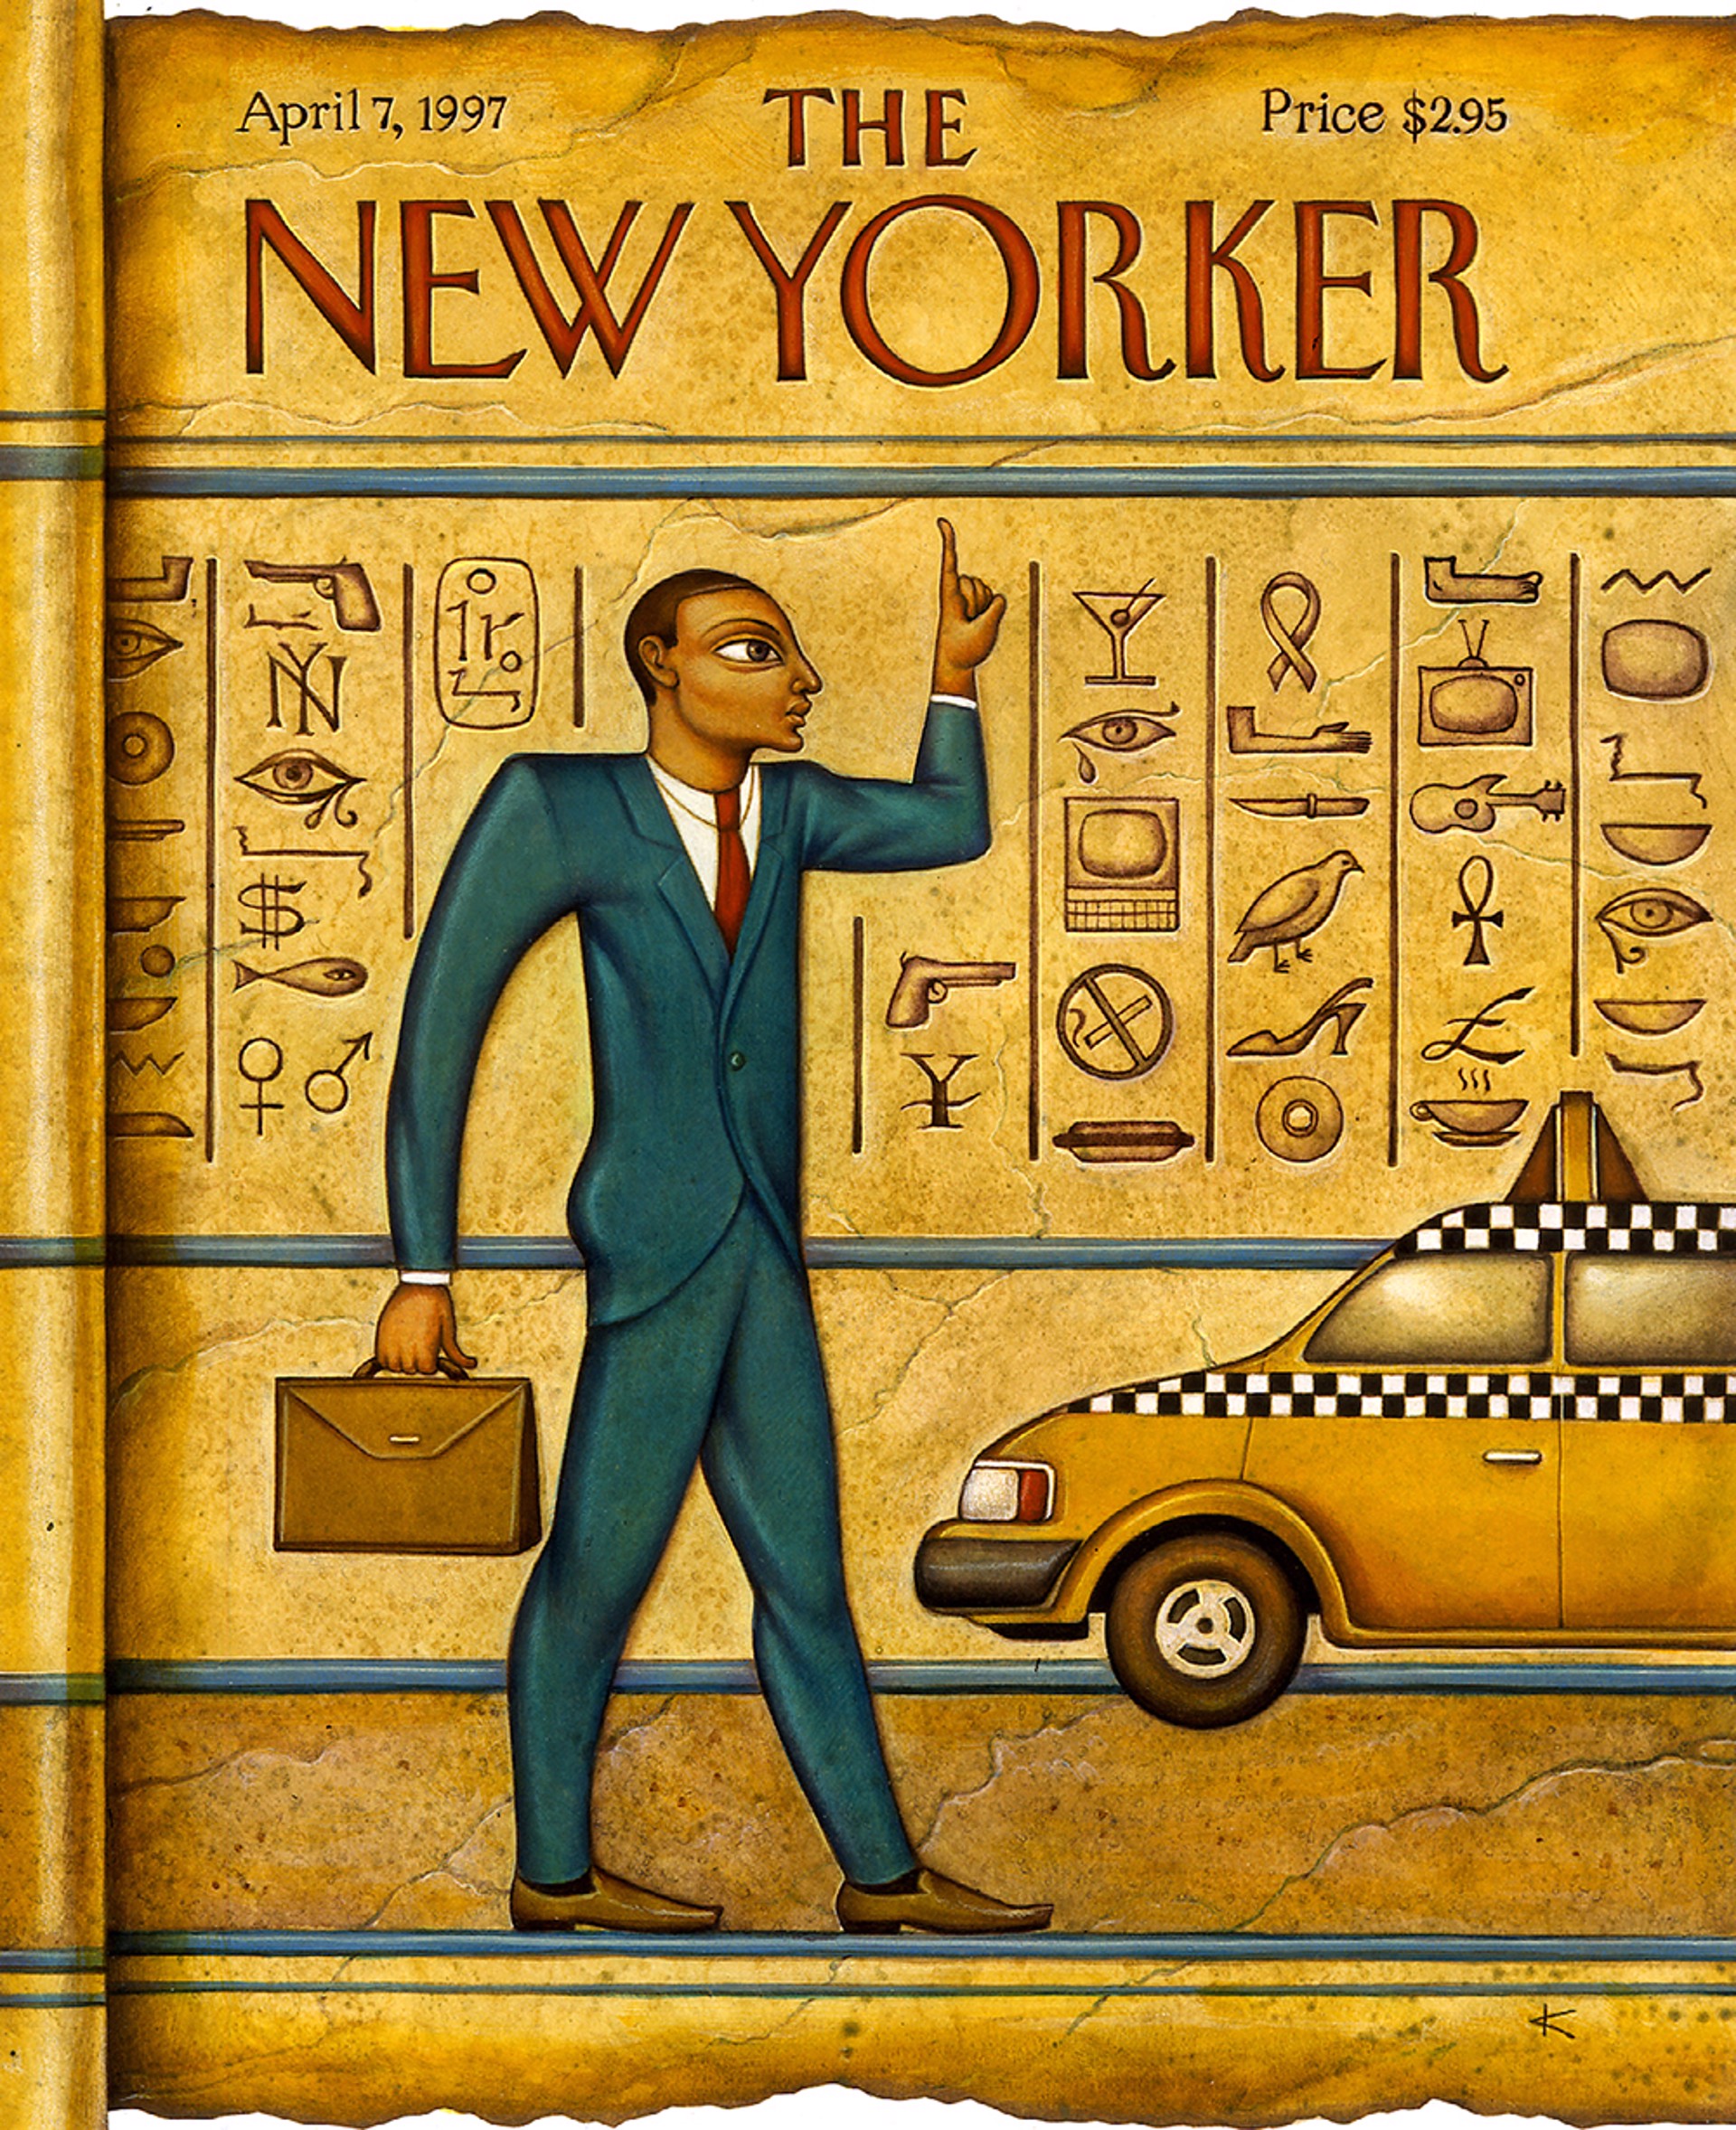 Cover for The New Yorker Magazine: Tut's Taxi by Anita Kunz